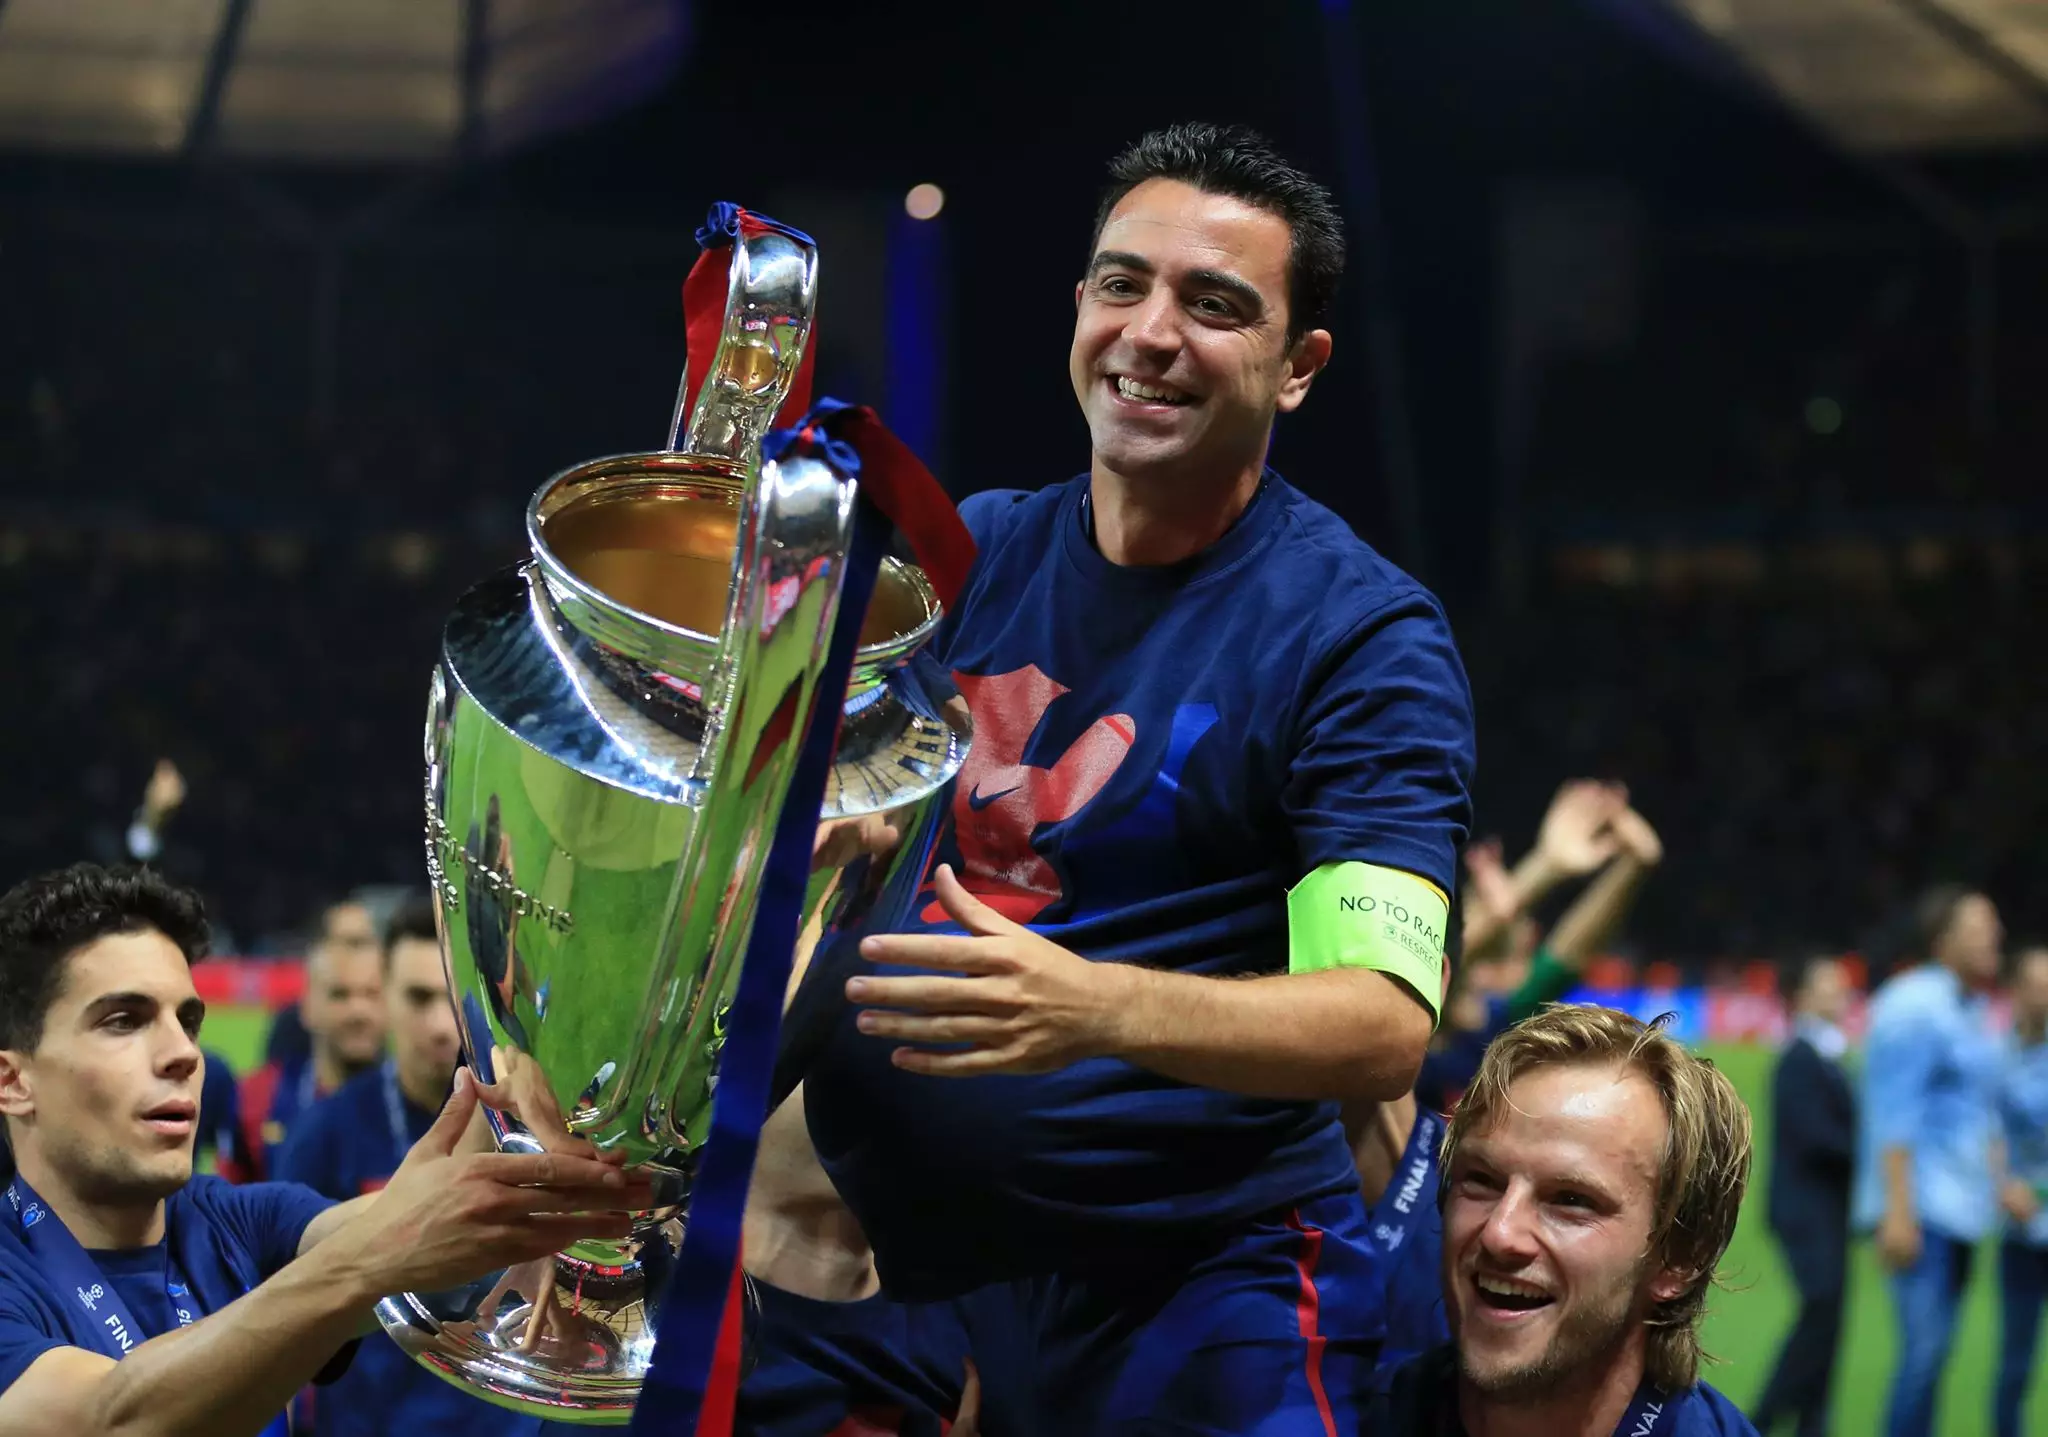 Xavi won the Champions League in 2015 but Barca haven't come close since. Image: PA Images